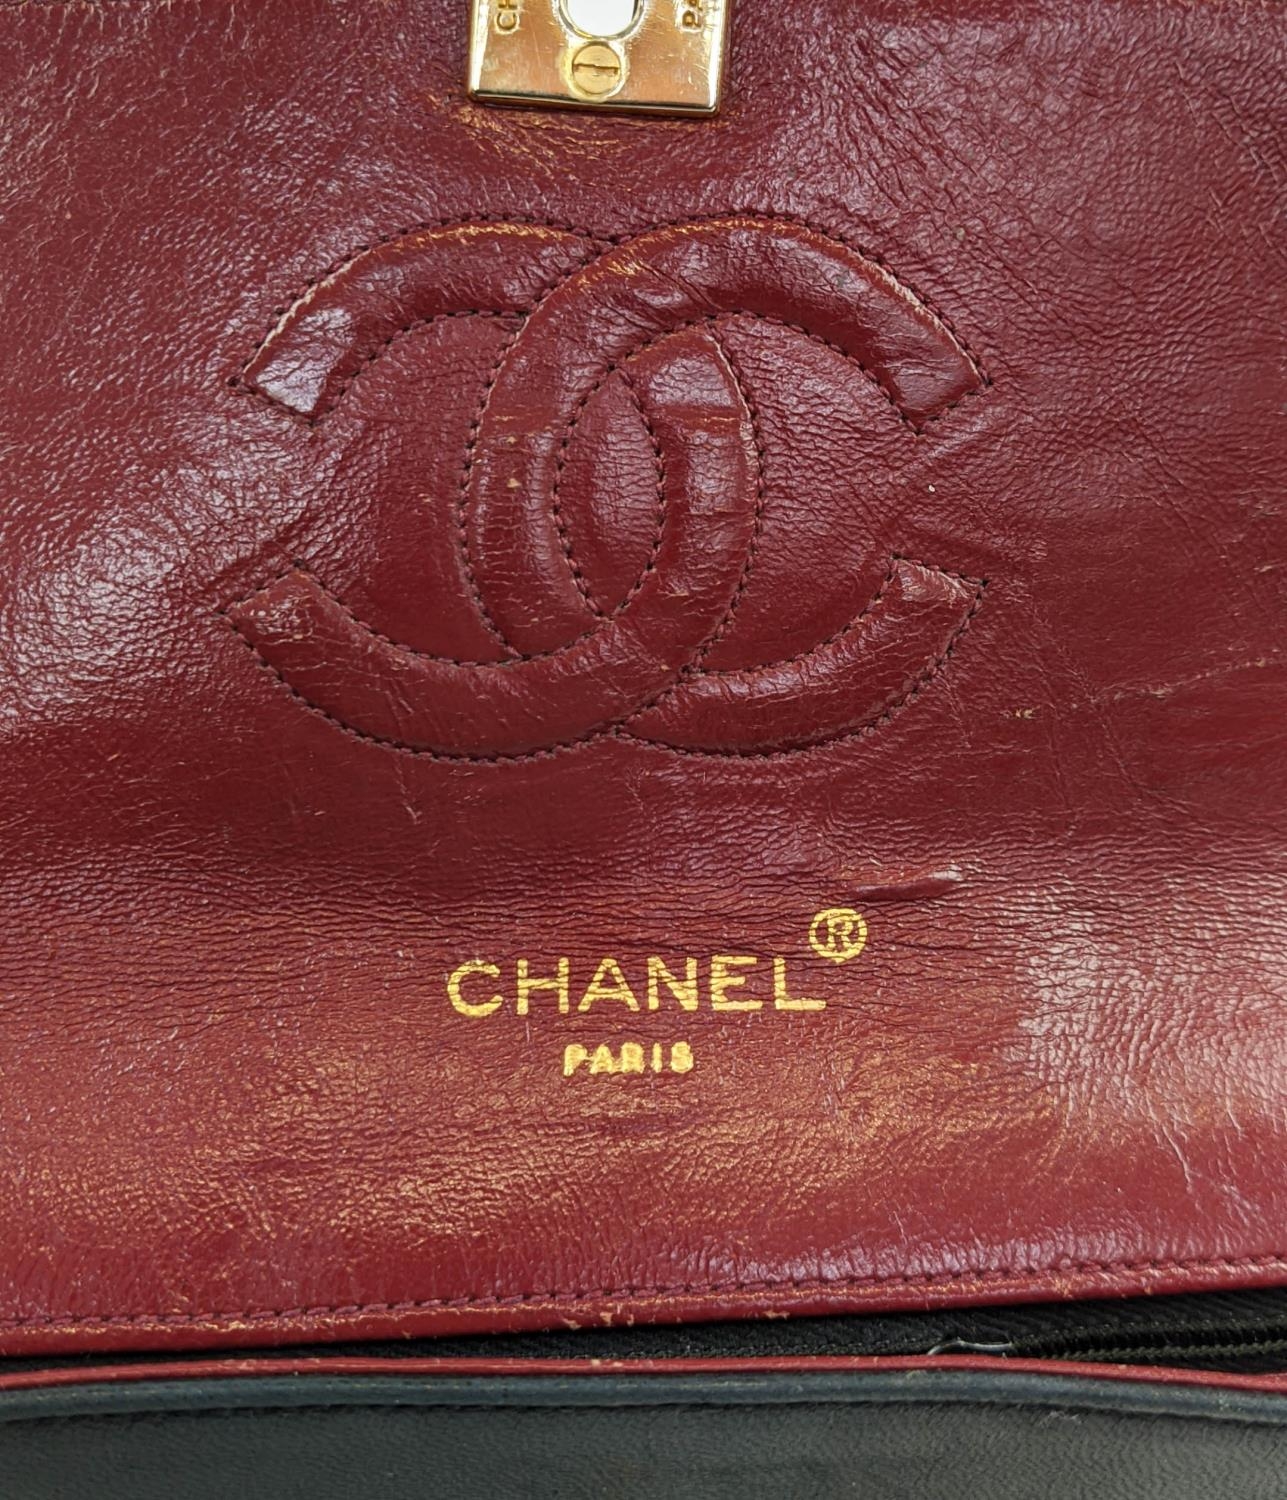 VINTAGE CHANEL FLAP BAG, round turn-lock, iconic burgundy leather lining, quilted front and back - Image 12 of 13